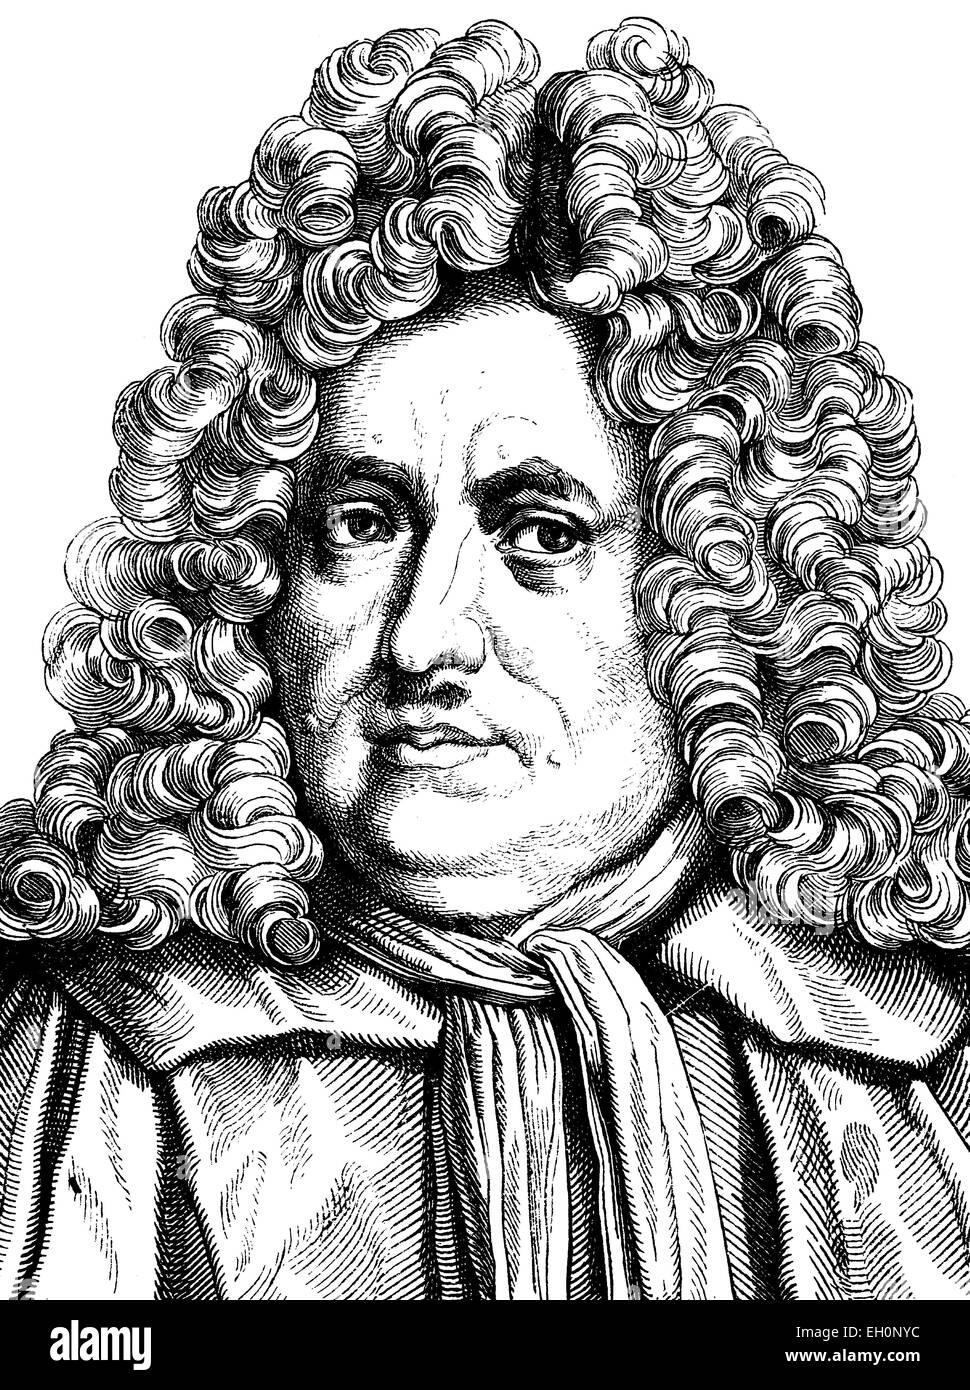 Digital improved image of Christian Thomasius, lawyer, philospher of the Enlightenment, 1655 - 1728, historical illustration, portrait, 1880 Stock Photo